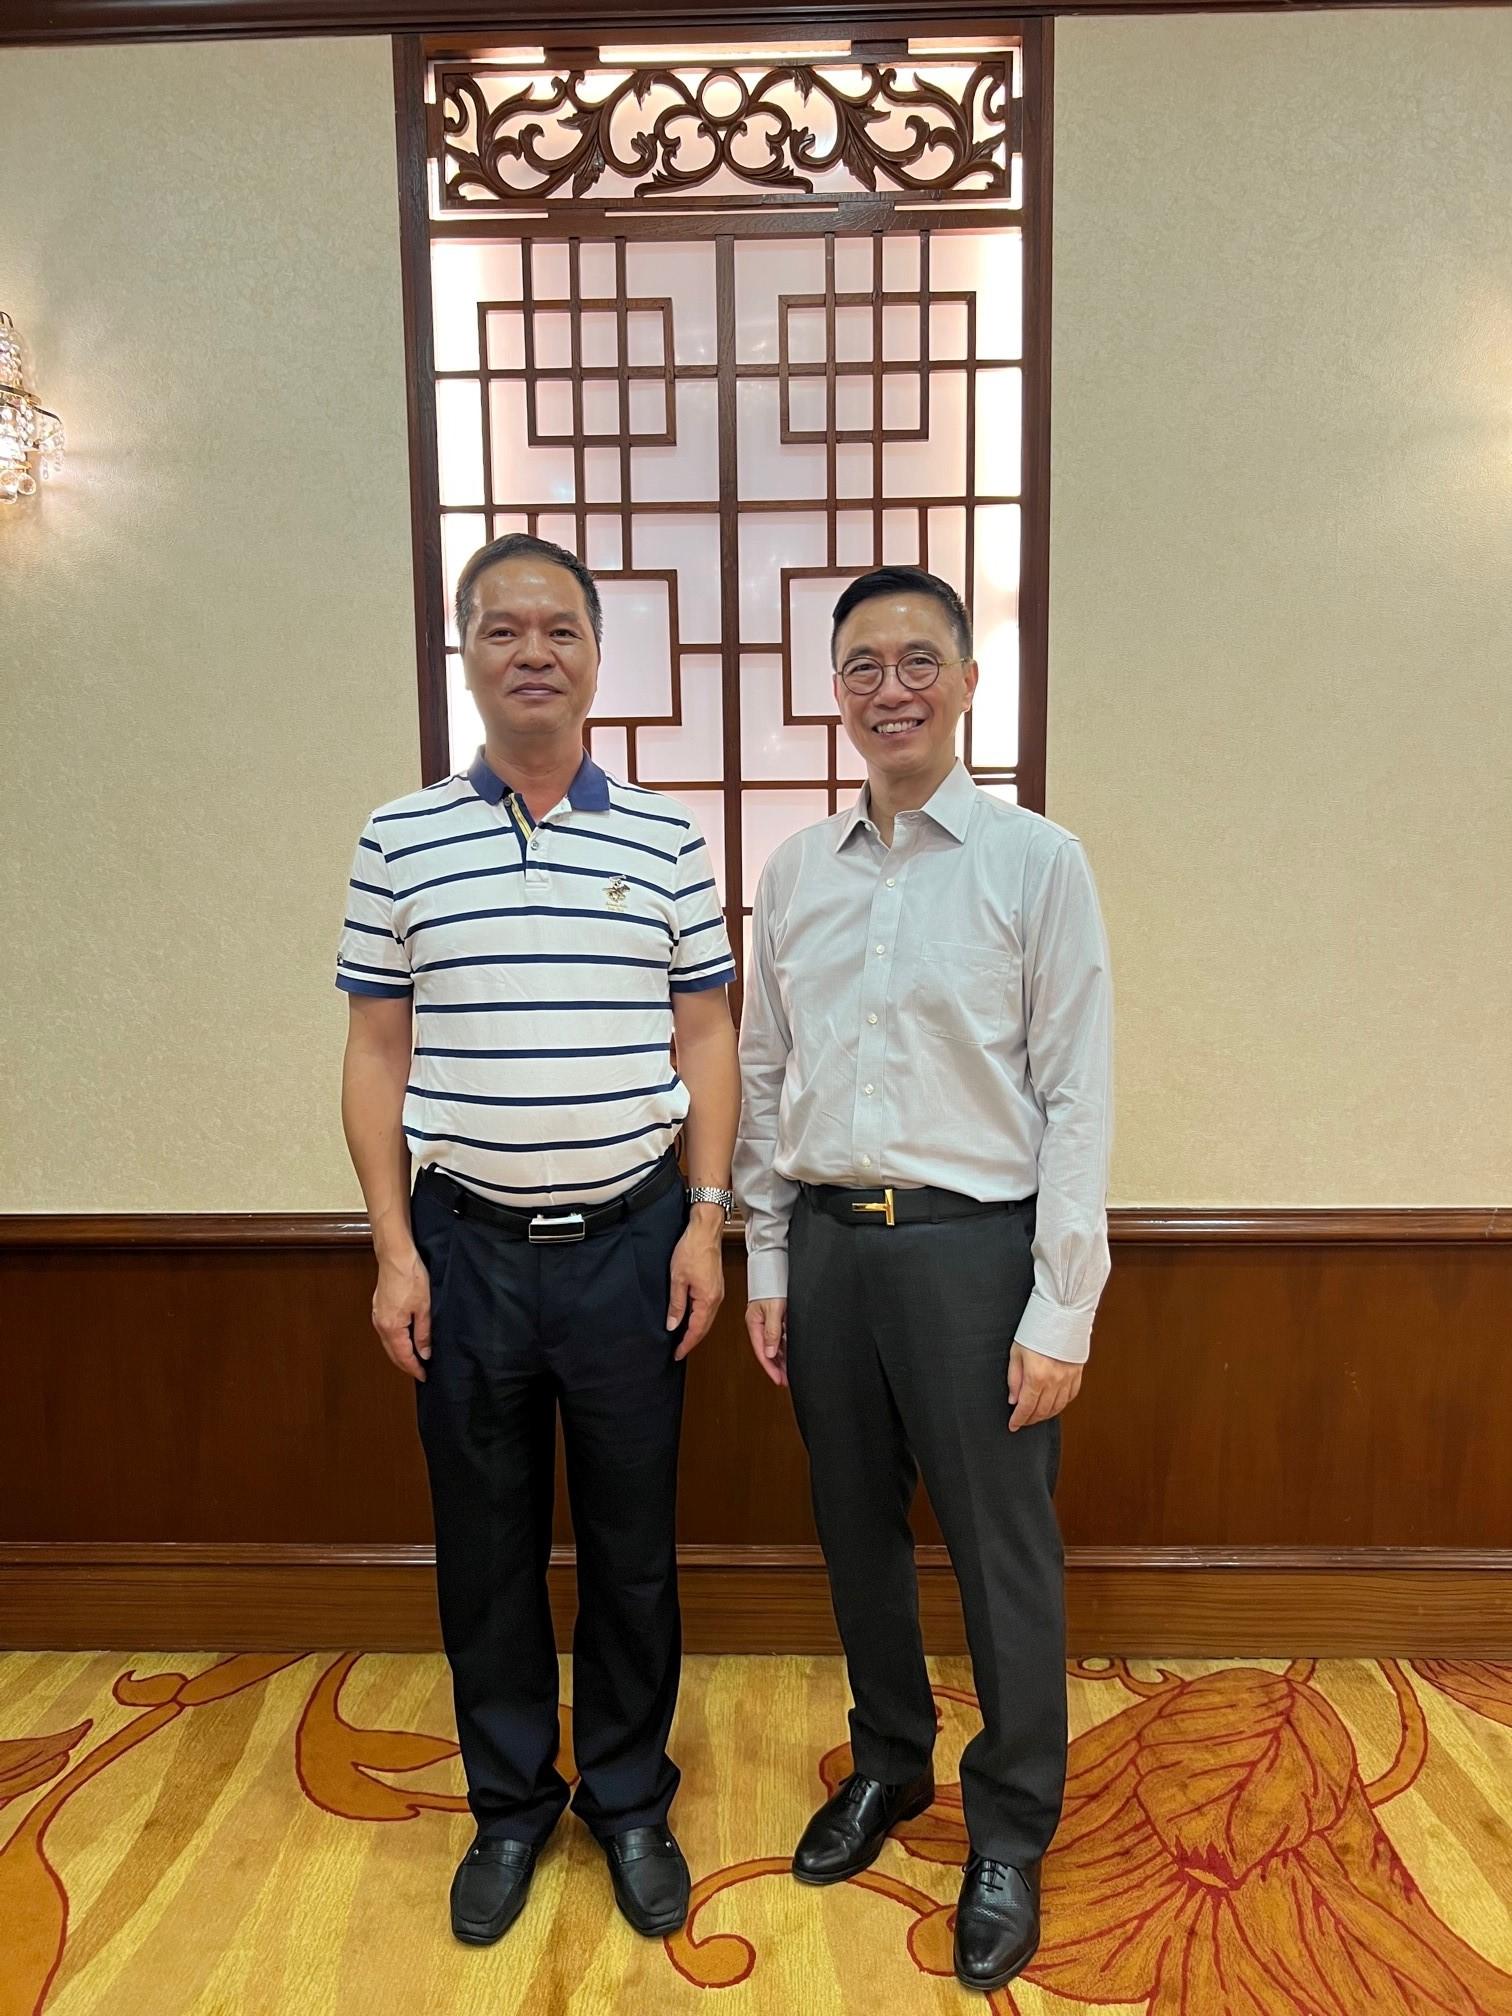 The Secretary for Culture, Sports and Tourism, Mr Kevin Yeung (right), met with Vice Mayor of the People's Government of Foshan Municipality Mr Huang Shaowen (left) in Foshan yesterday (July 11) to exchange views on cultural and tourism development opportunities.